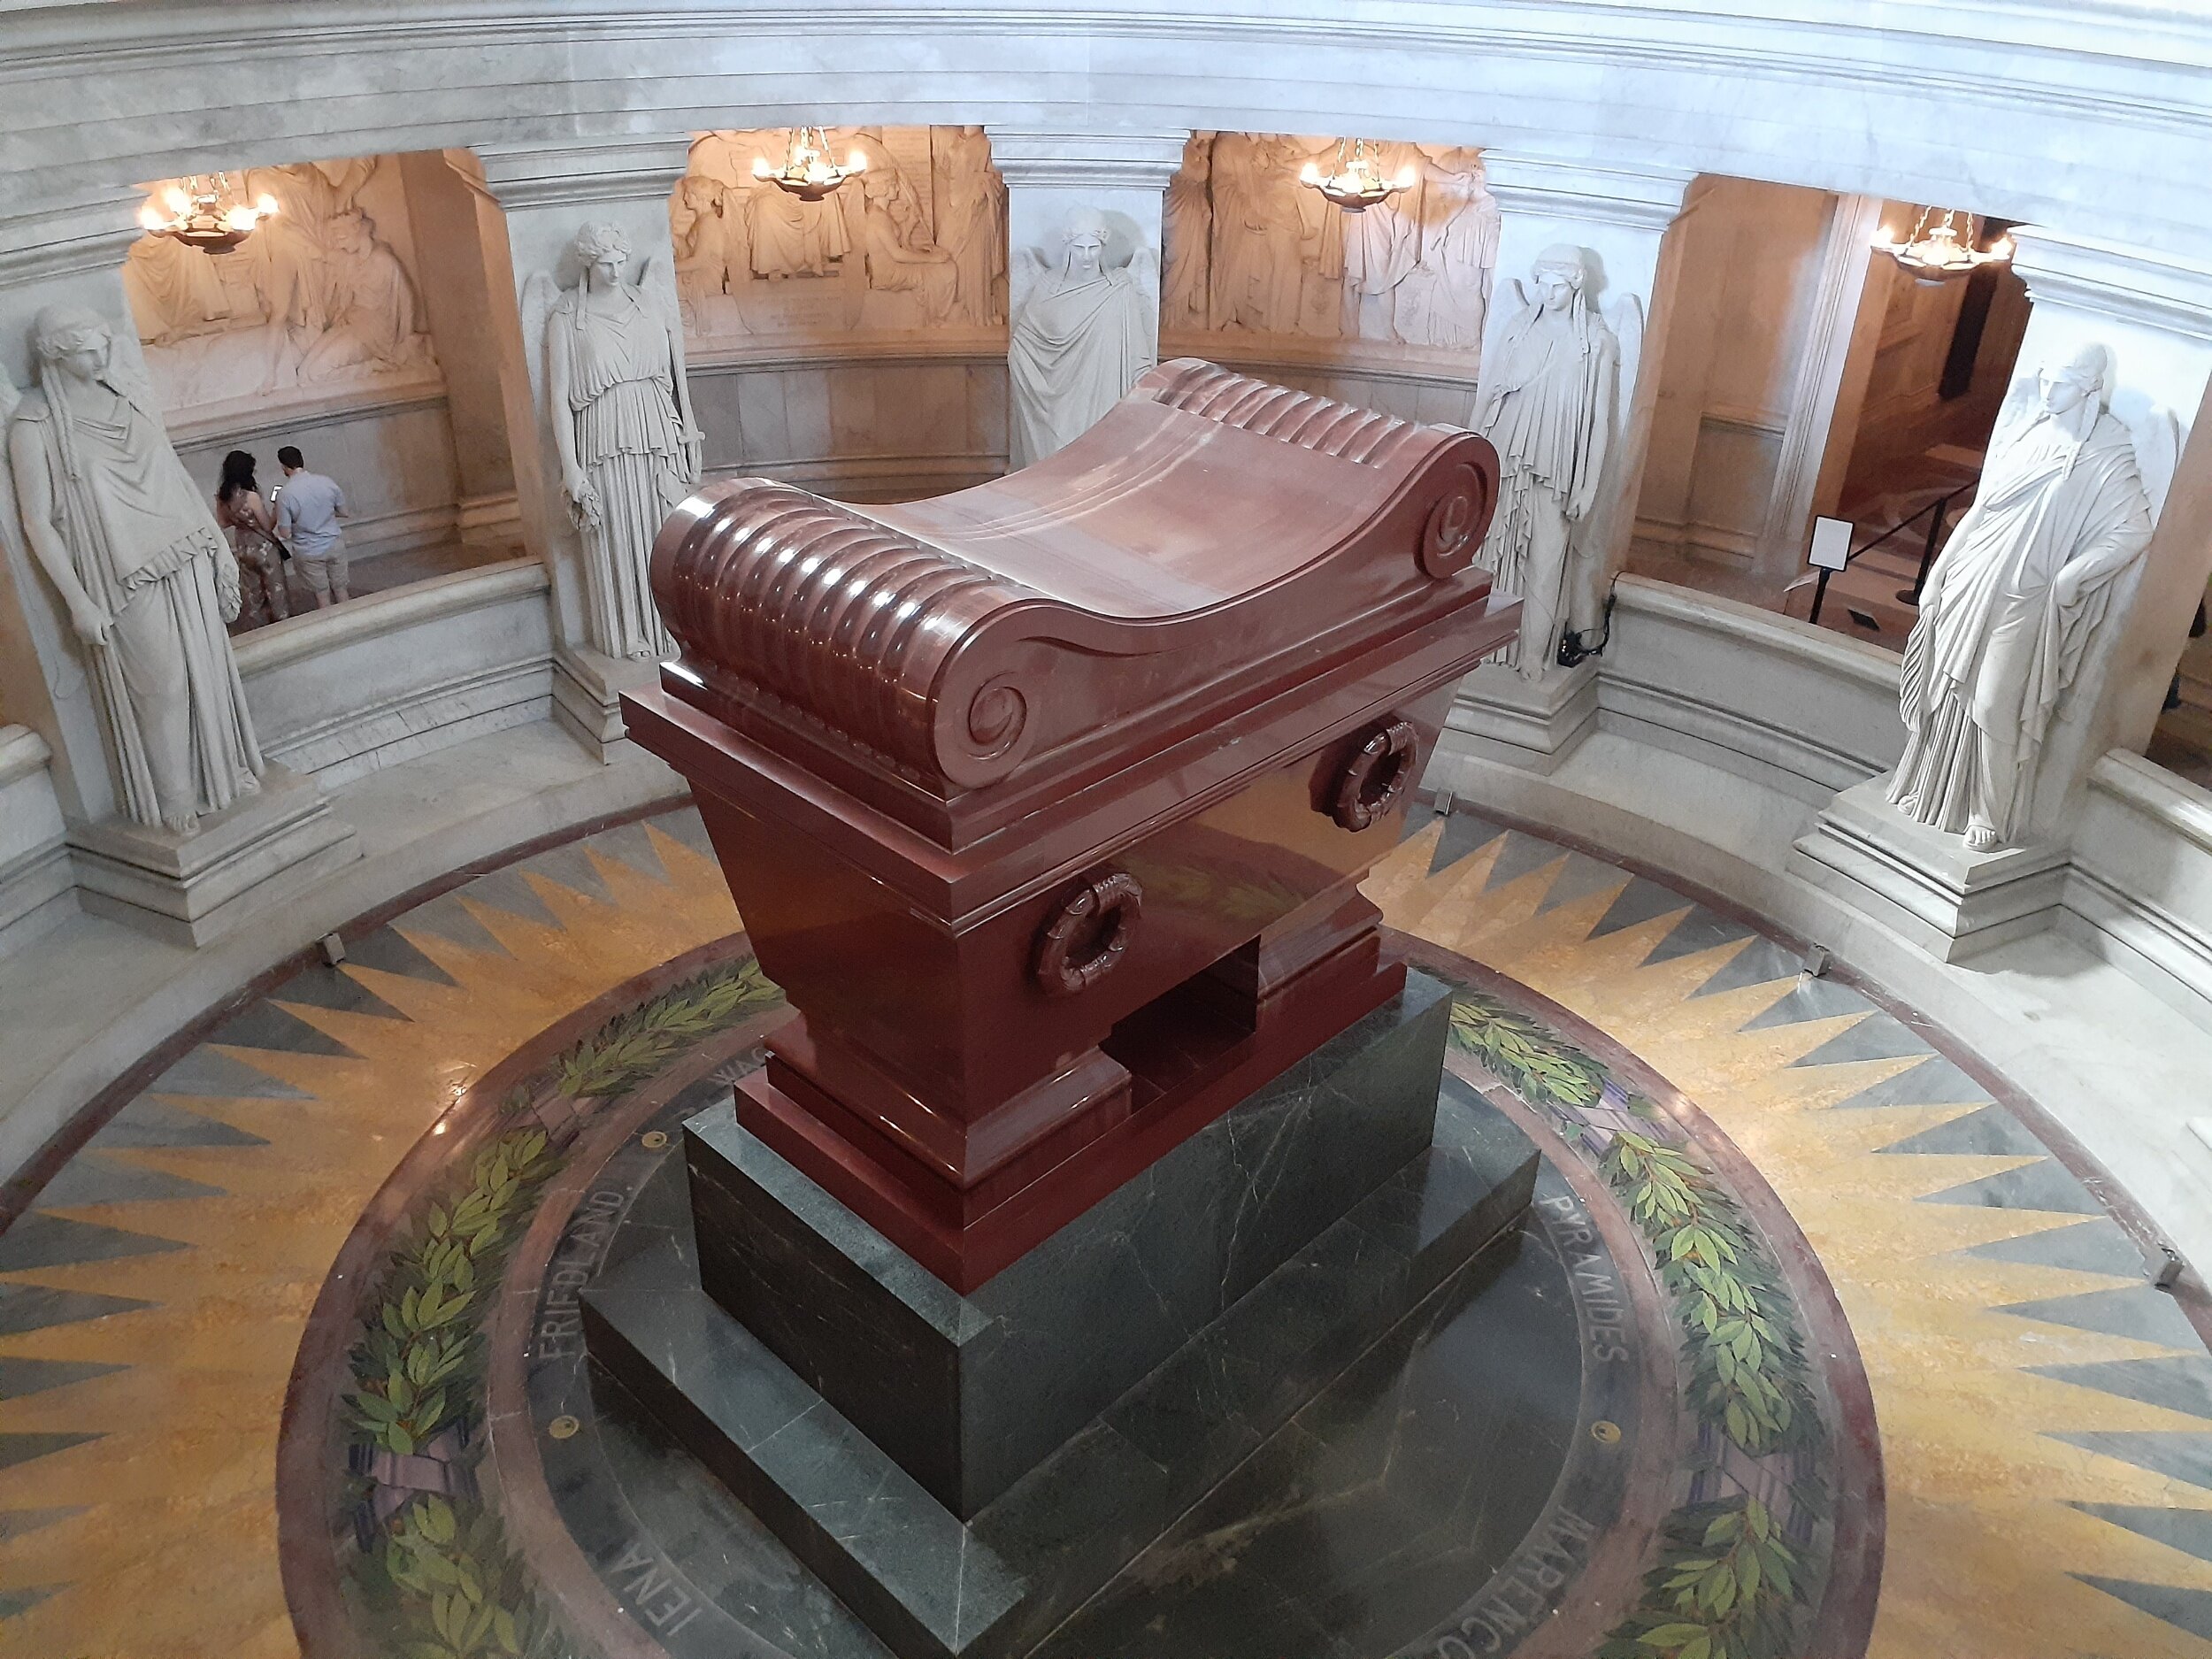 Napolean's Tomb - Invalides Army Museum